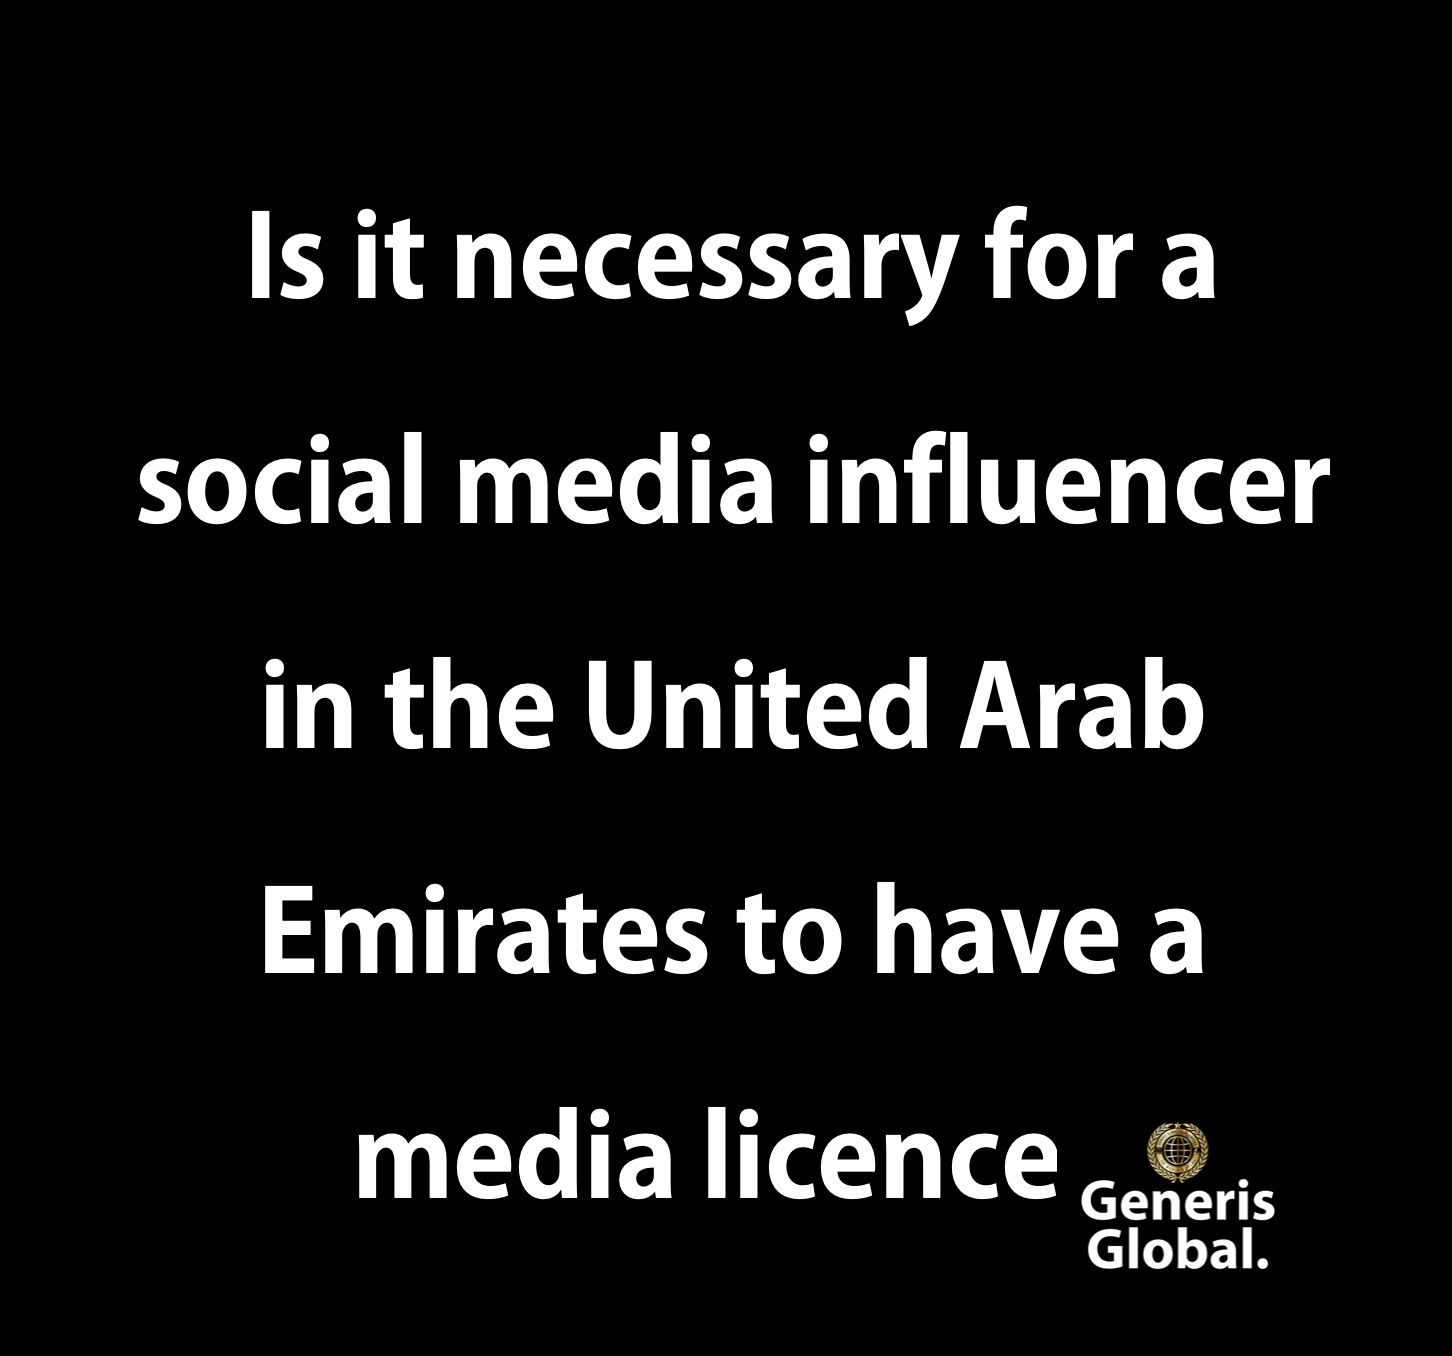 social media influencer in the United Arab Emirates